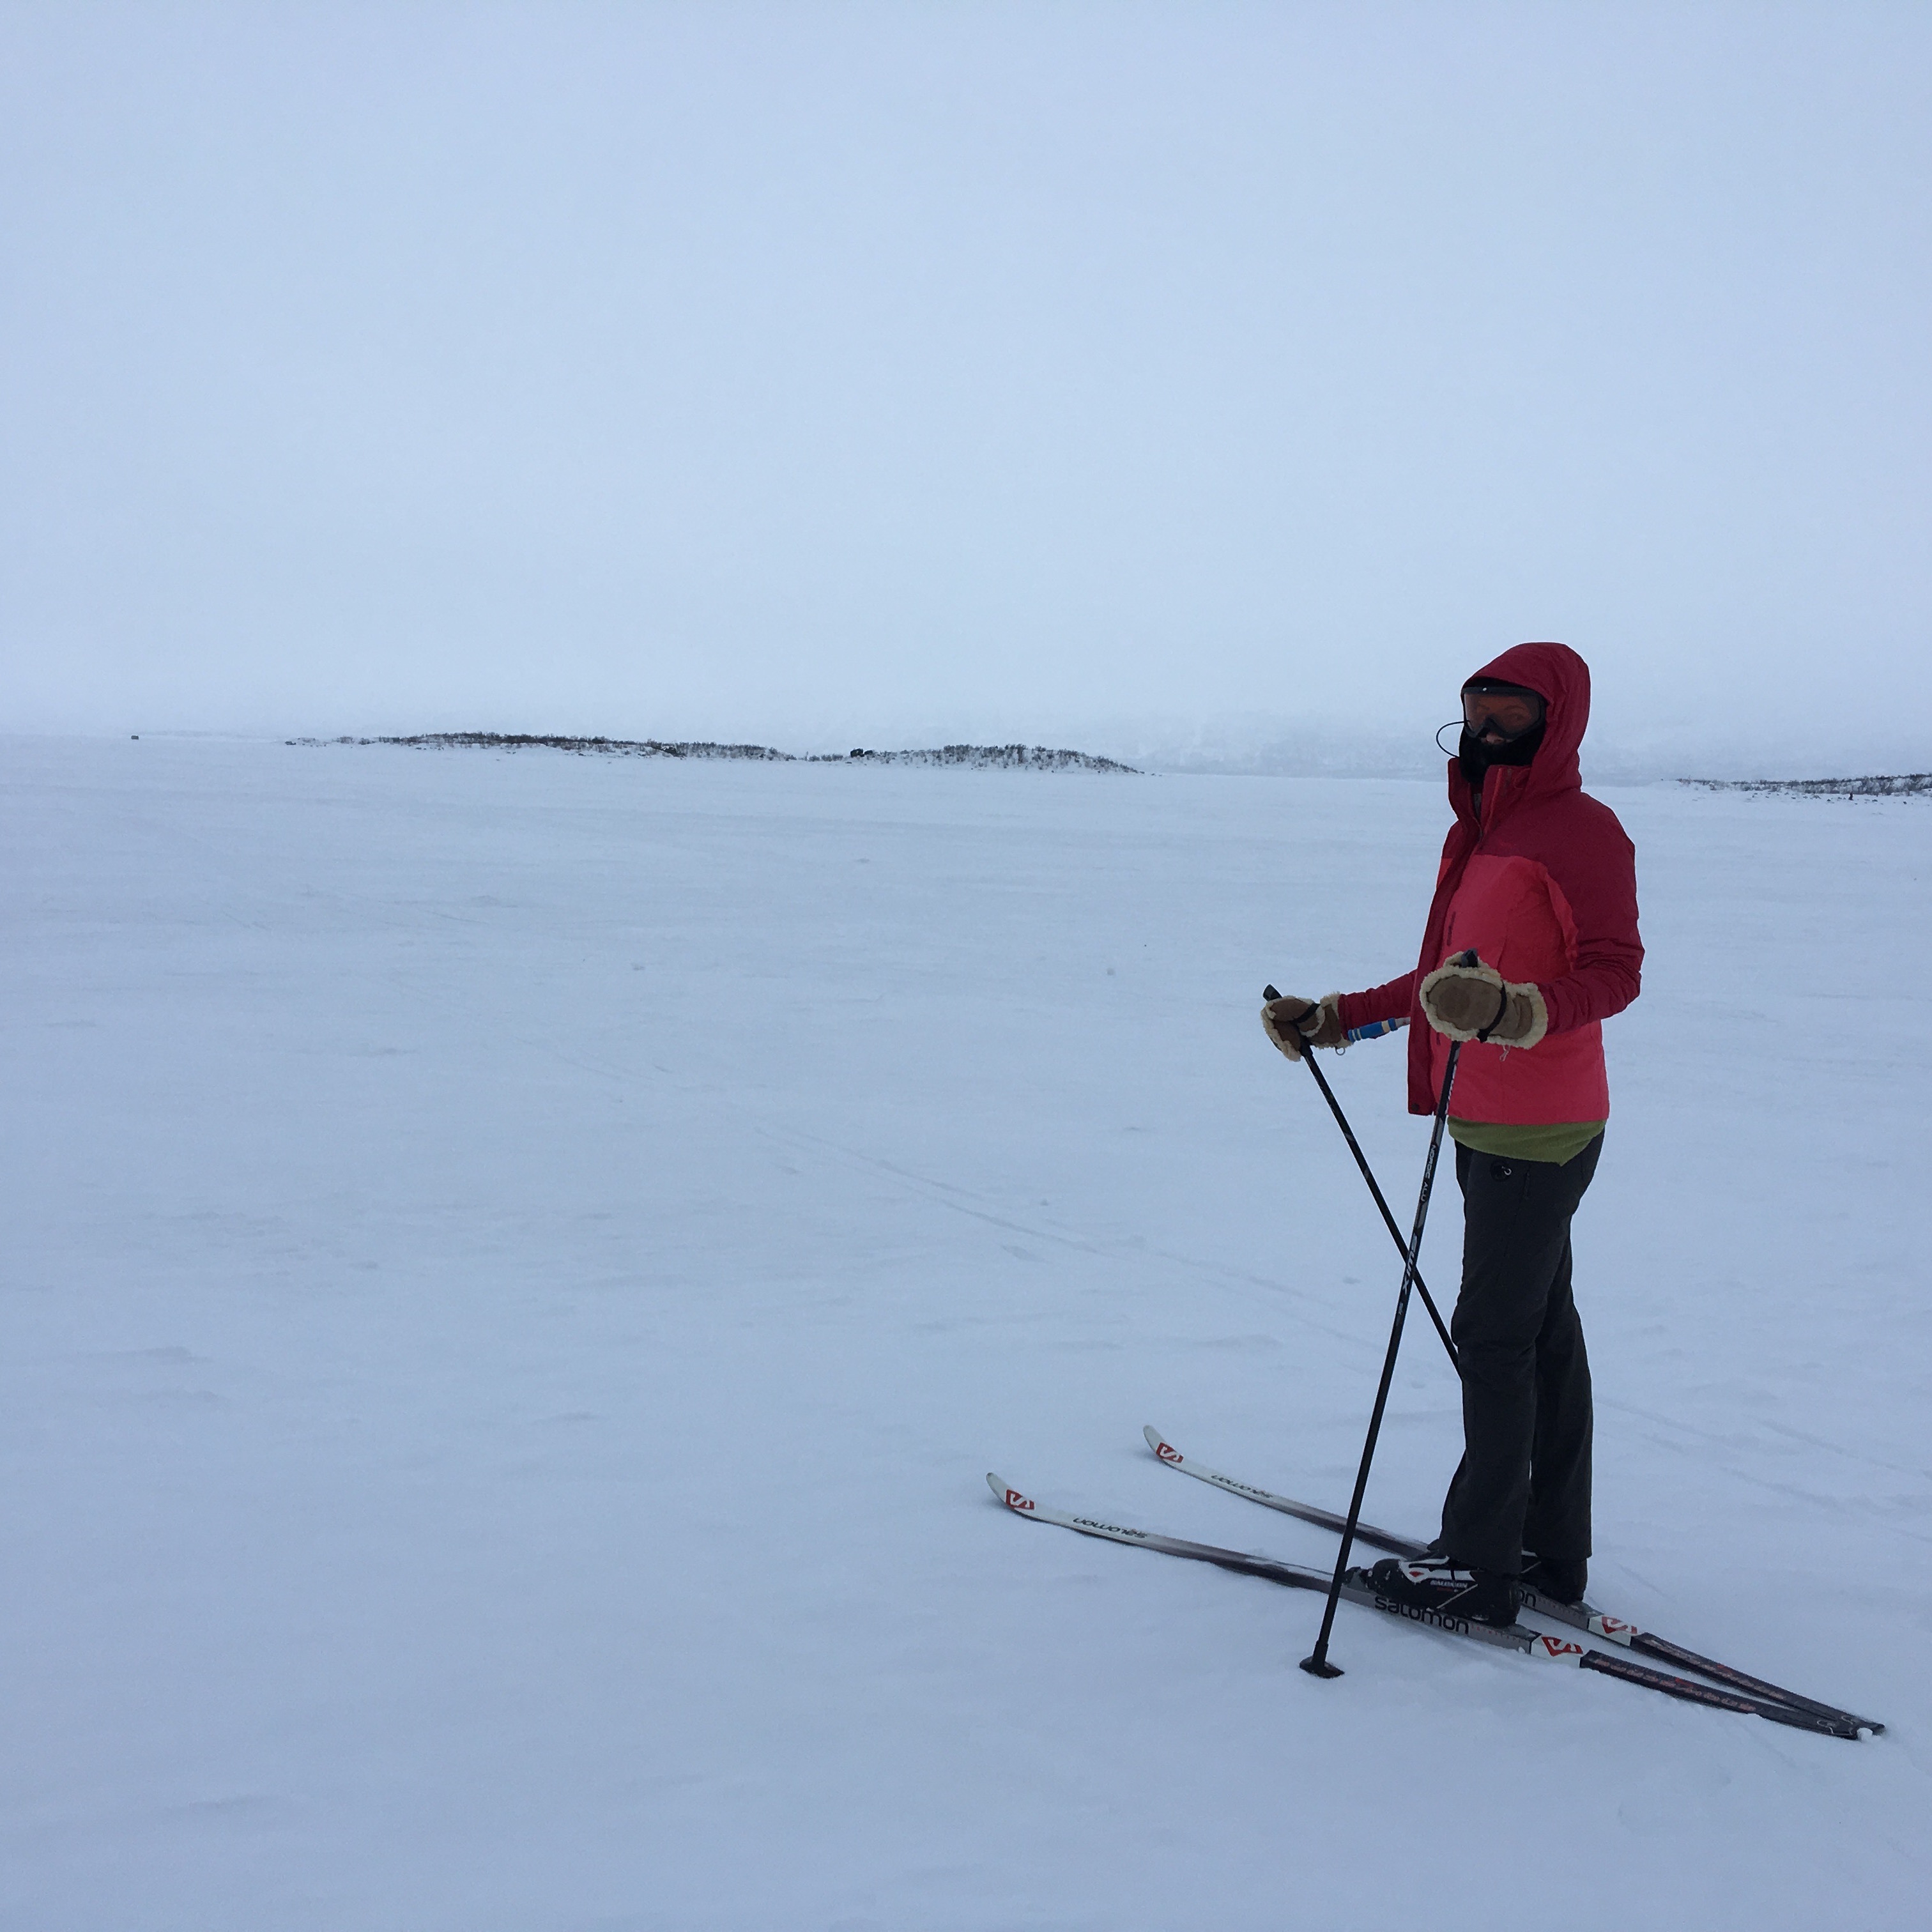 Skiing across the frozen lake near Abisko surrounded by a white-out blizzard.